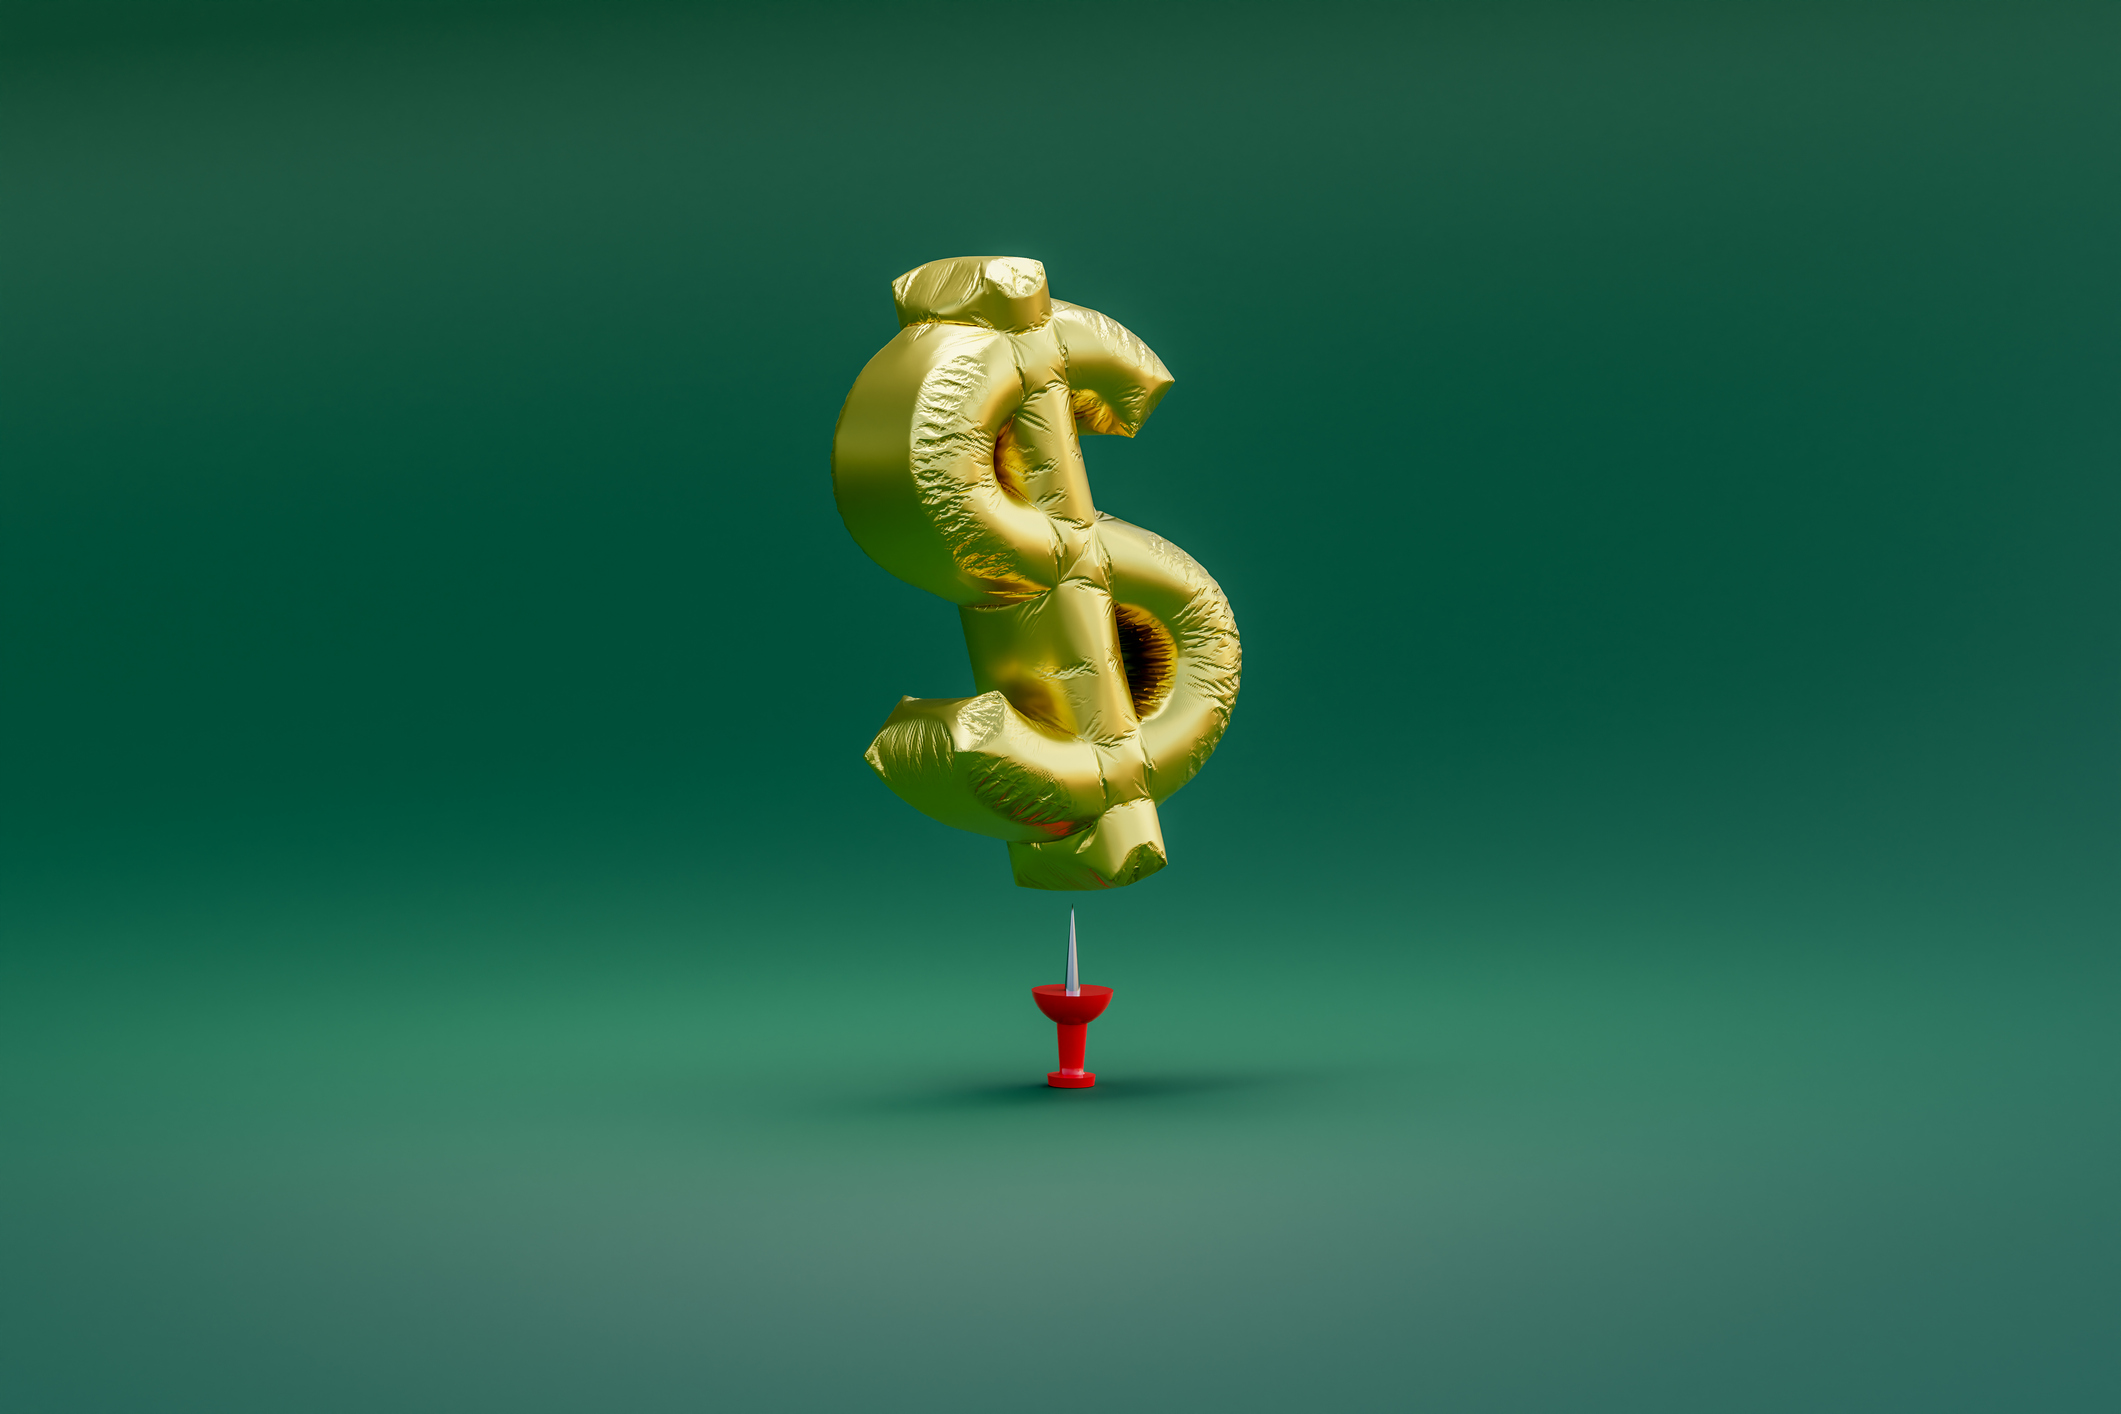 A dollar-sign balloon floating over a pushpin poised to pop it.